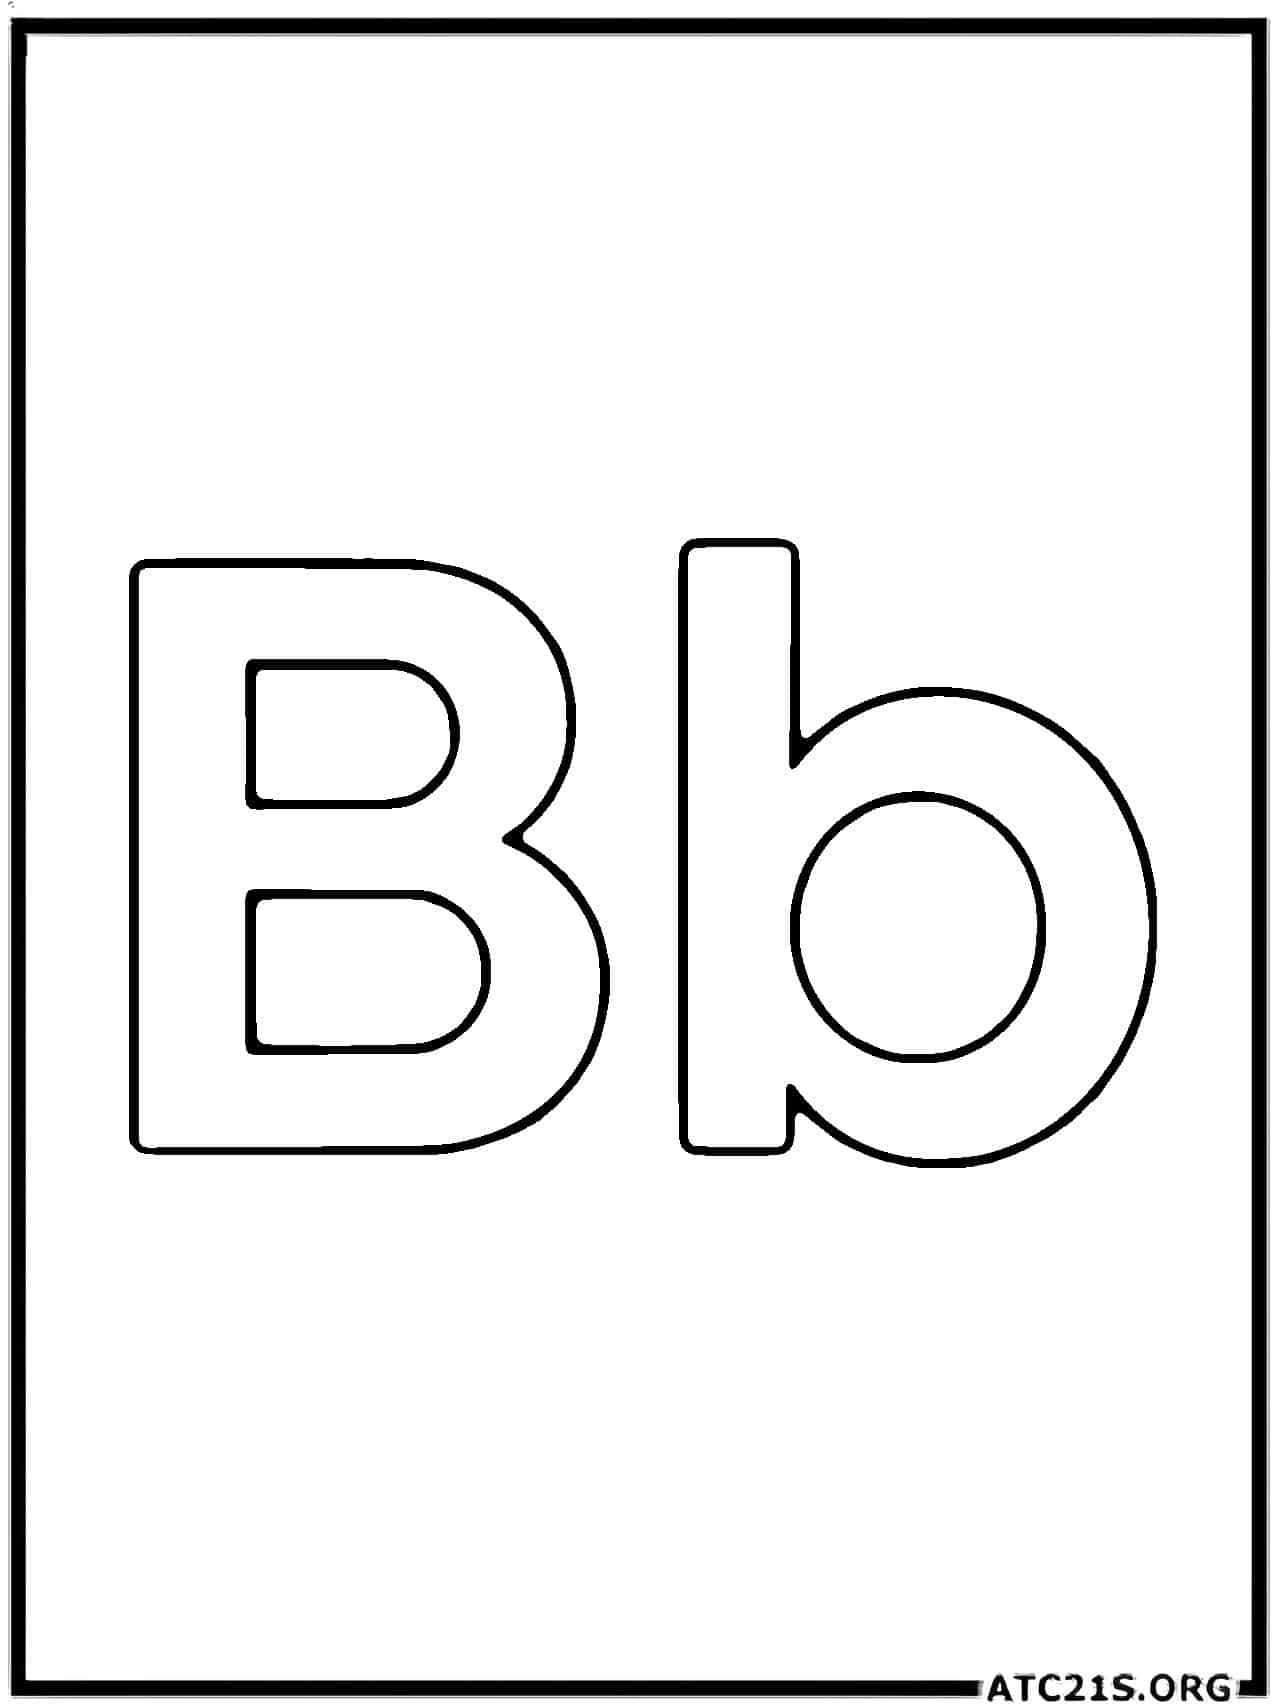 letter_b_coloring_page